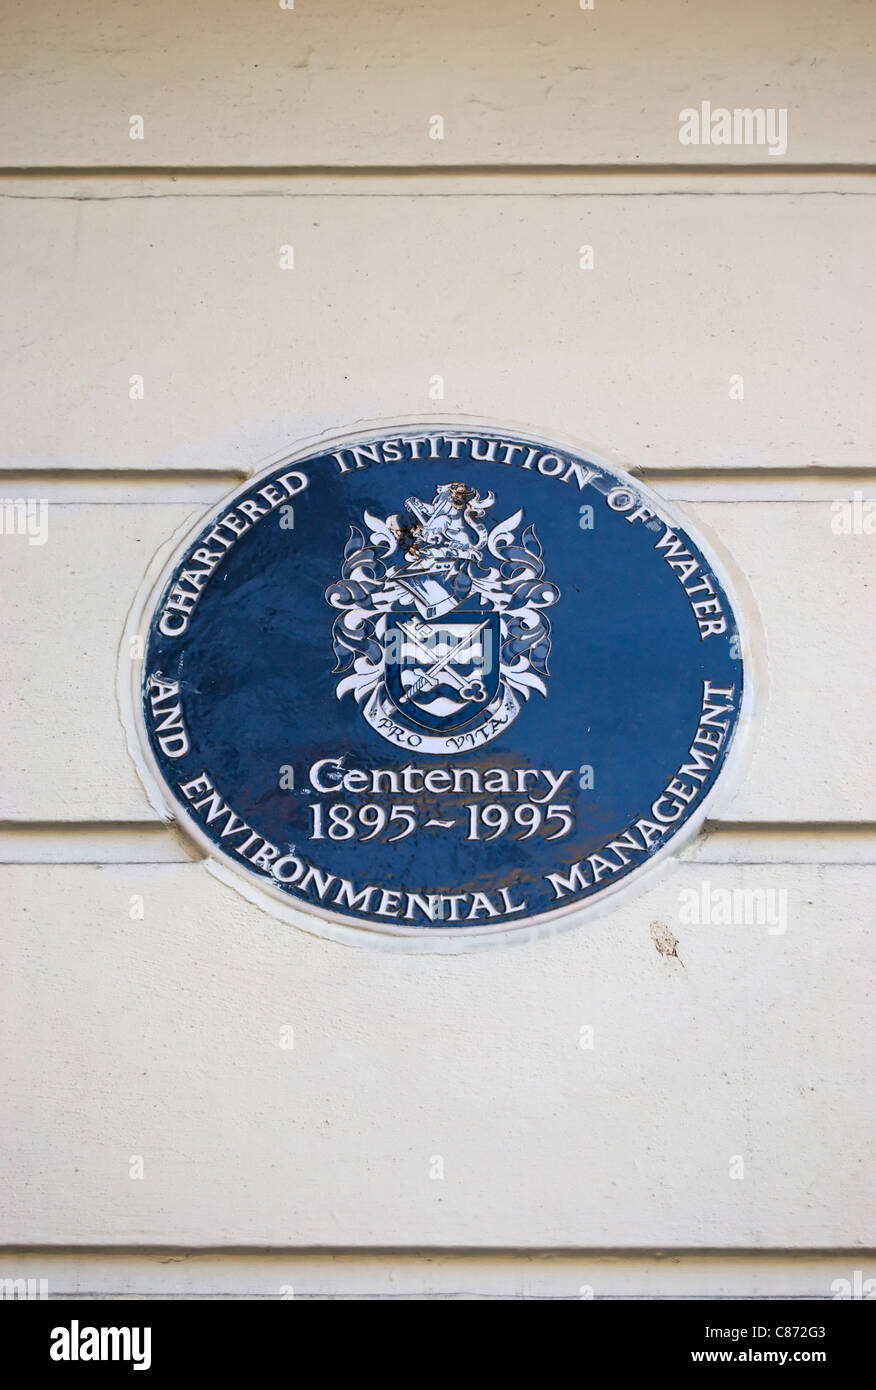 plaque marking the 1995 centenary of the chartered institution of water and environmental management, john street, london Stock Photo